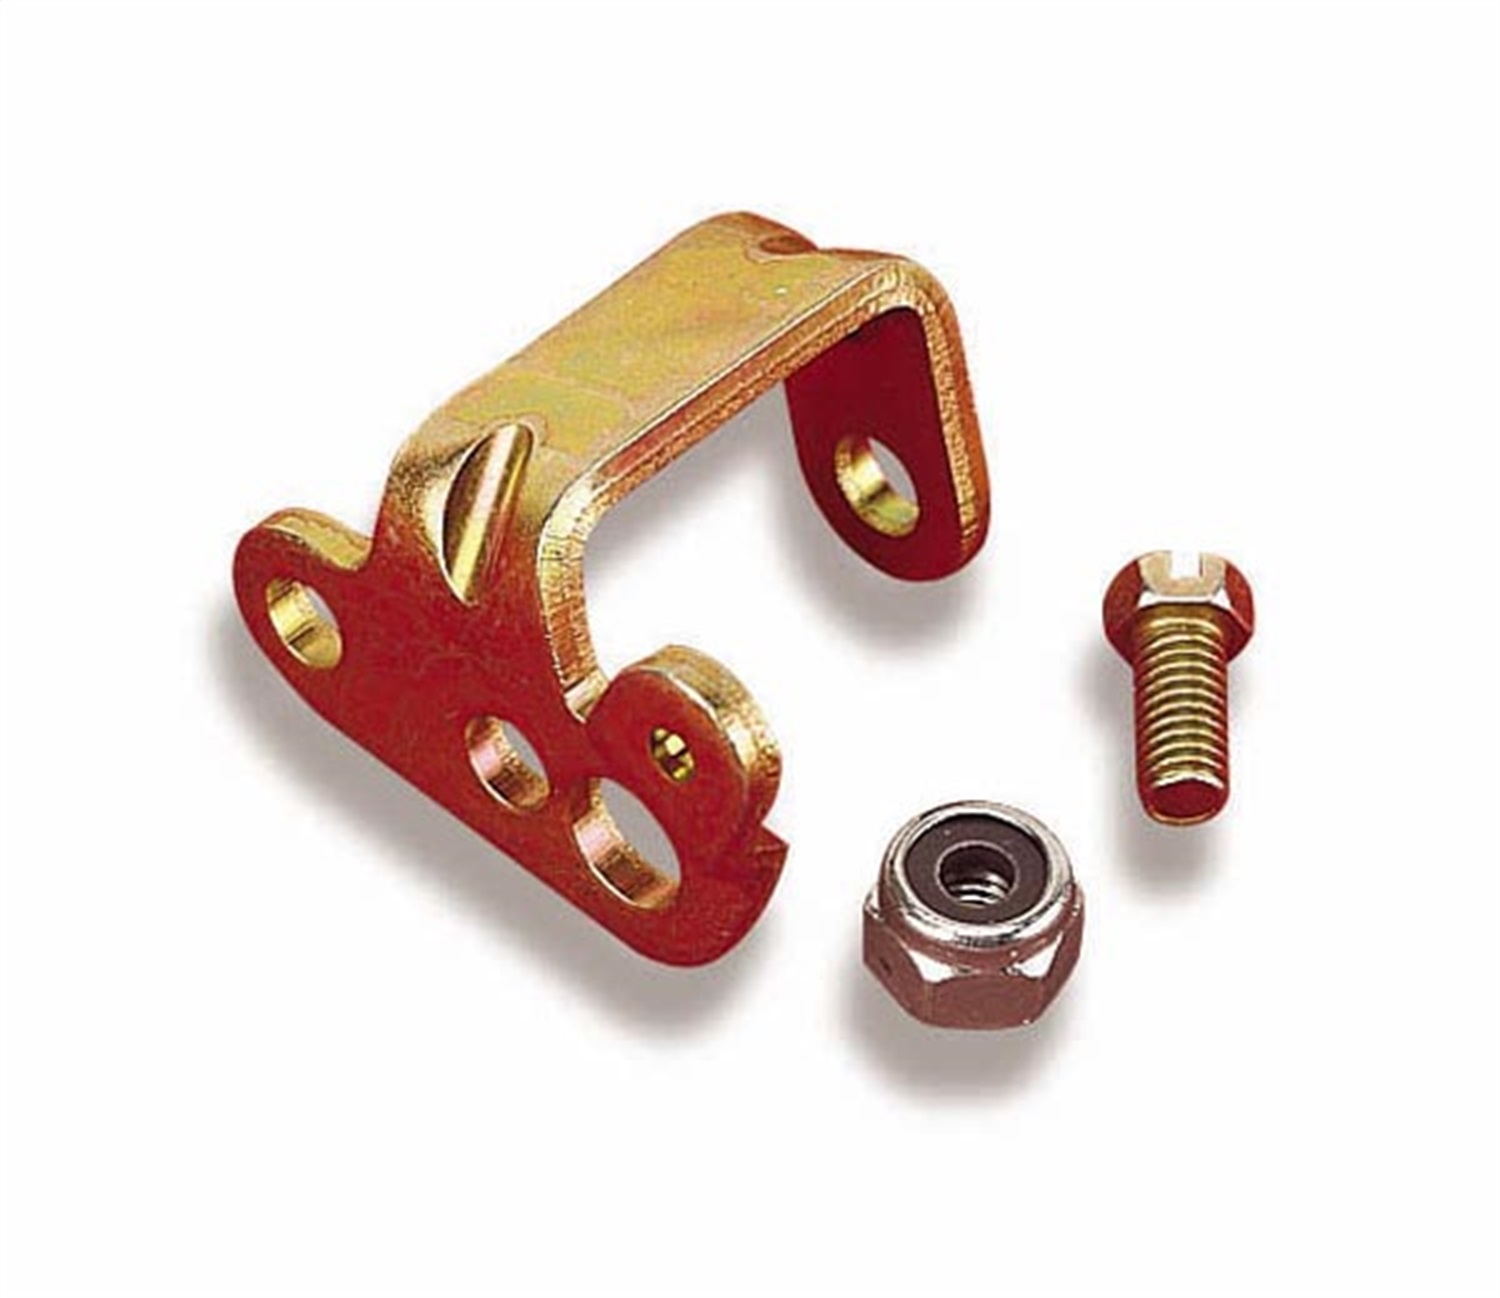 Holley Performance Holley Performance 20-35 Transmission Kickdown Throttle Linkage